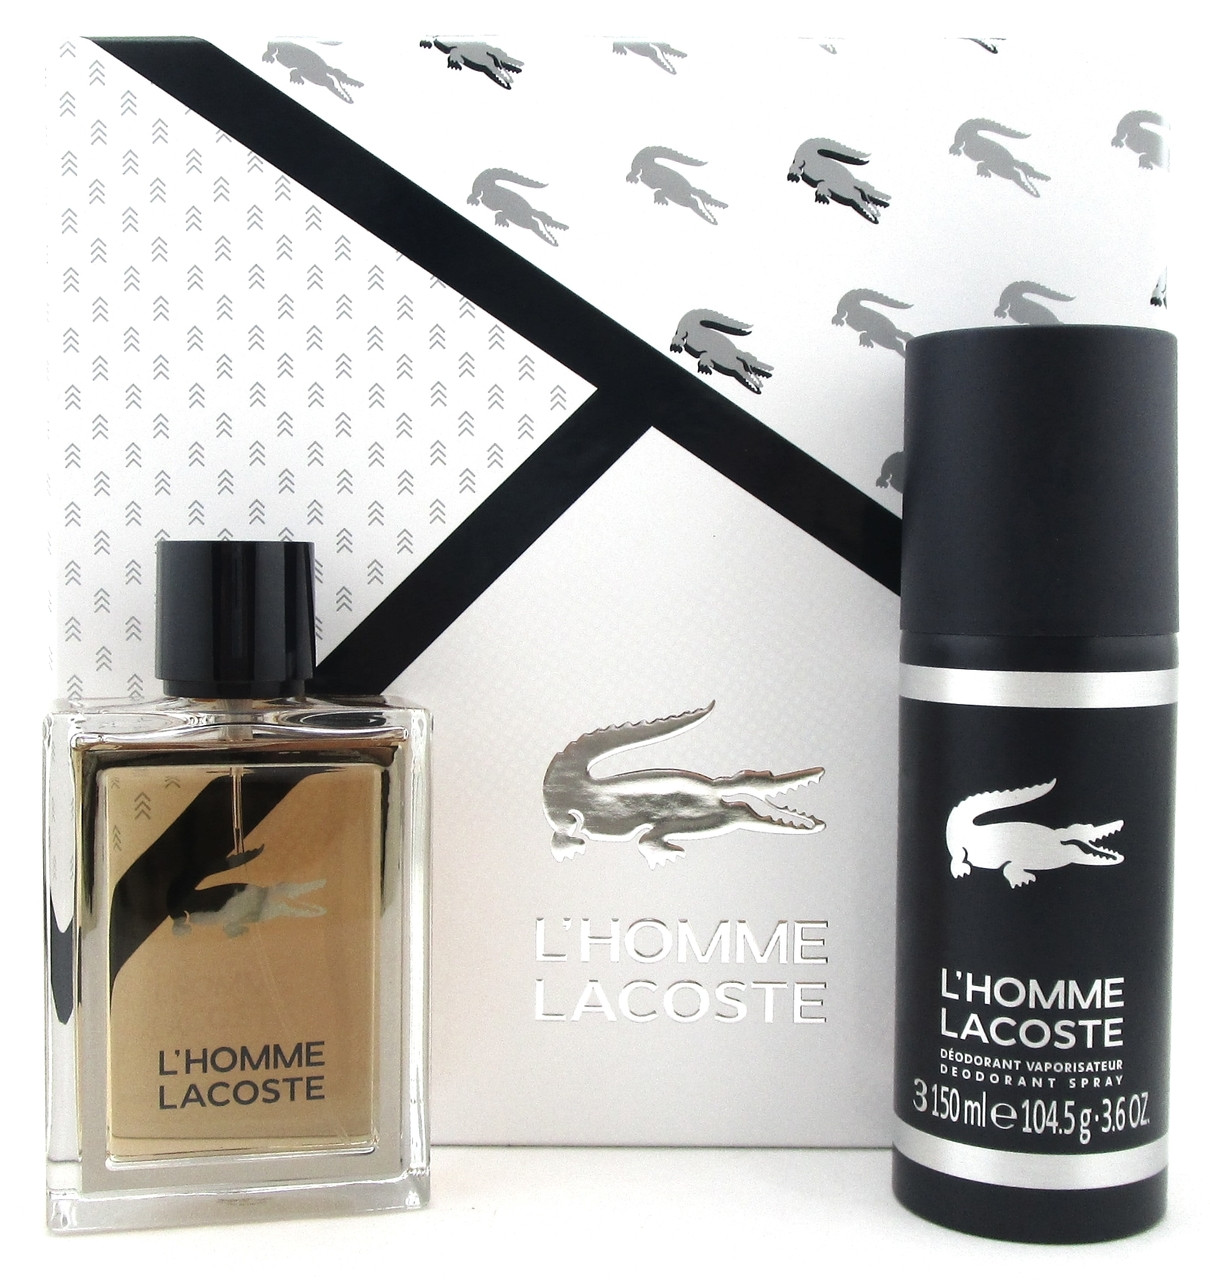 L'Homme Lacoste by Lacoste Set for Men: 3.3oz.EDT Spray+3.6oz.Deo Spray. New Set - eDiscountPerfumes.com -FREE SHIPPING* From An Independent Seller of 100% Authentic Brands 1979 (*standard shipping to 48 states)